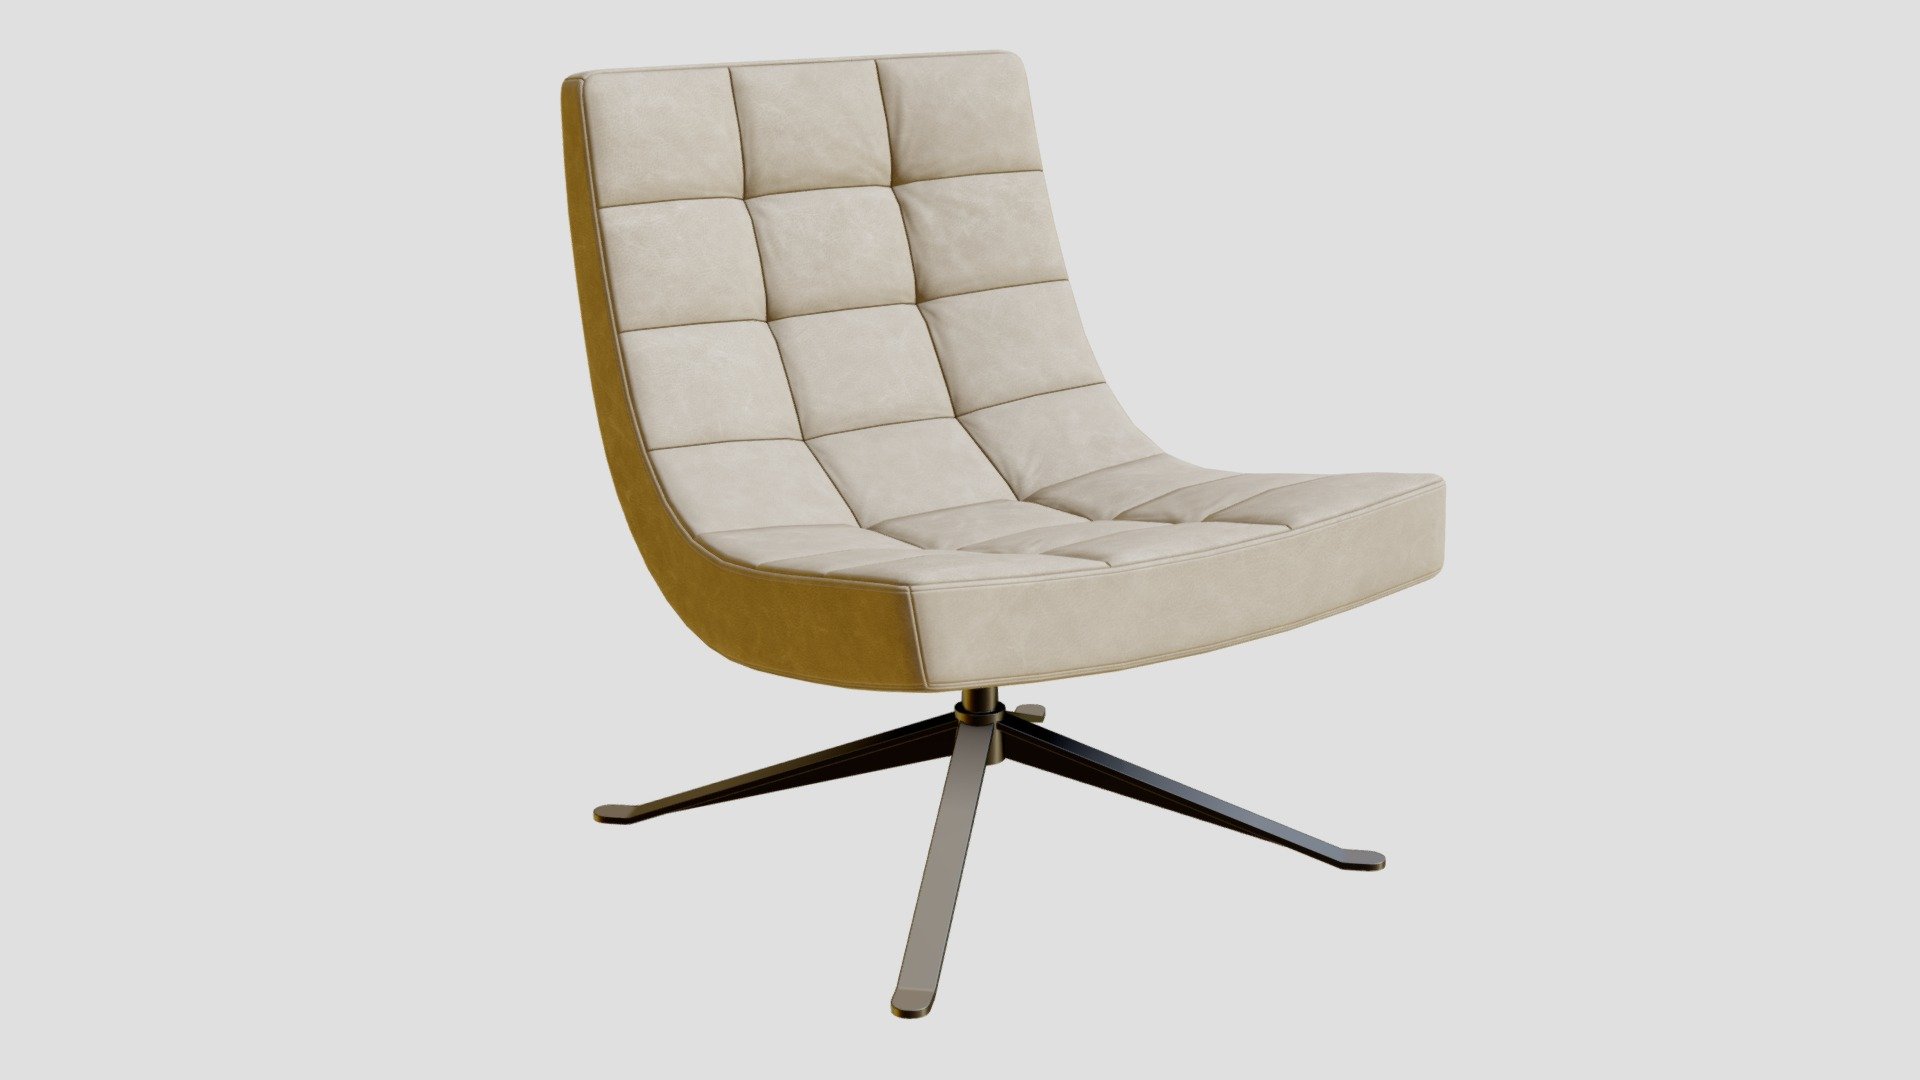 High-quality 3d model of a Restoration Hardware Carlton Leather Swivel Chair

Original: https://rh.com/us/en/catalog/product/product.jsp?productId=prod17370064&amp;layout=horizontal

6406 polygons
6713 vertices - Restoration Hardware Carlton Chair - Buy Royalty Free 3D model by 3detto 3d model